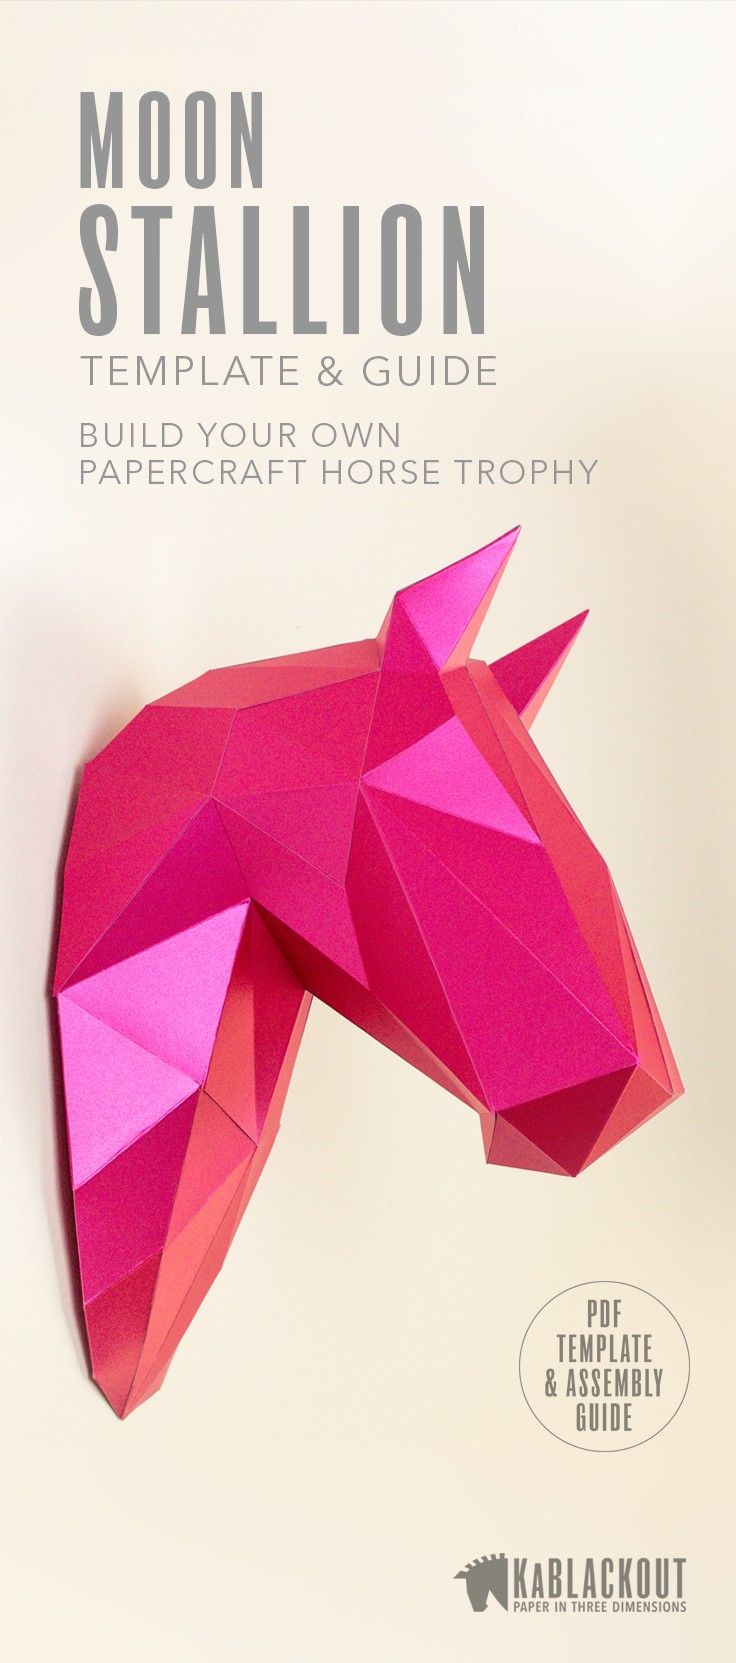 Papercraft Trophy Horse Papercraft Diy Horse Template Low Poly Horse 3d Wall Trophy